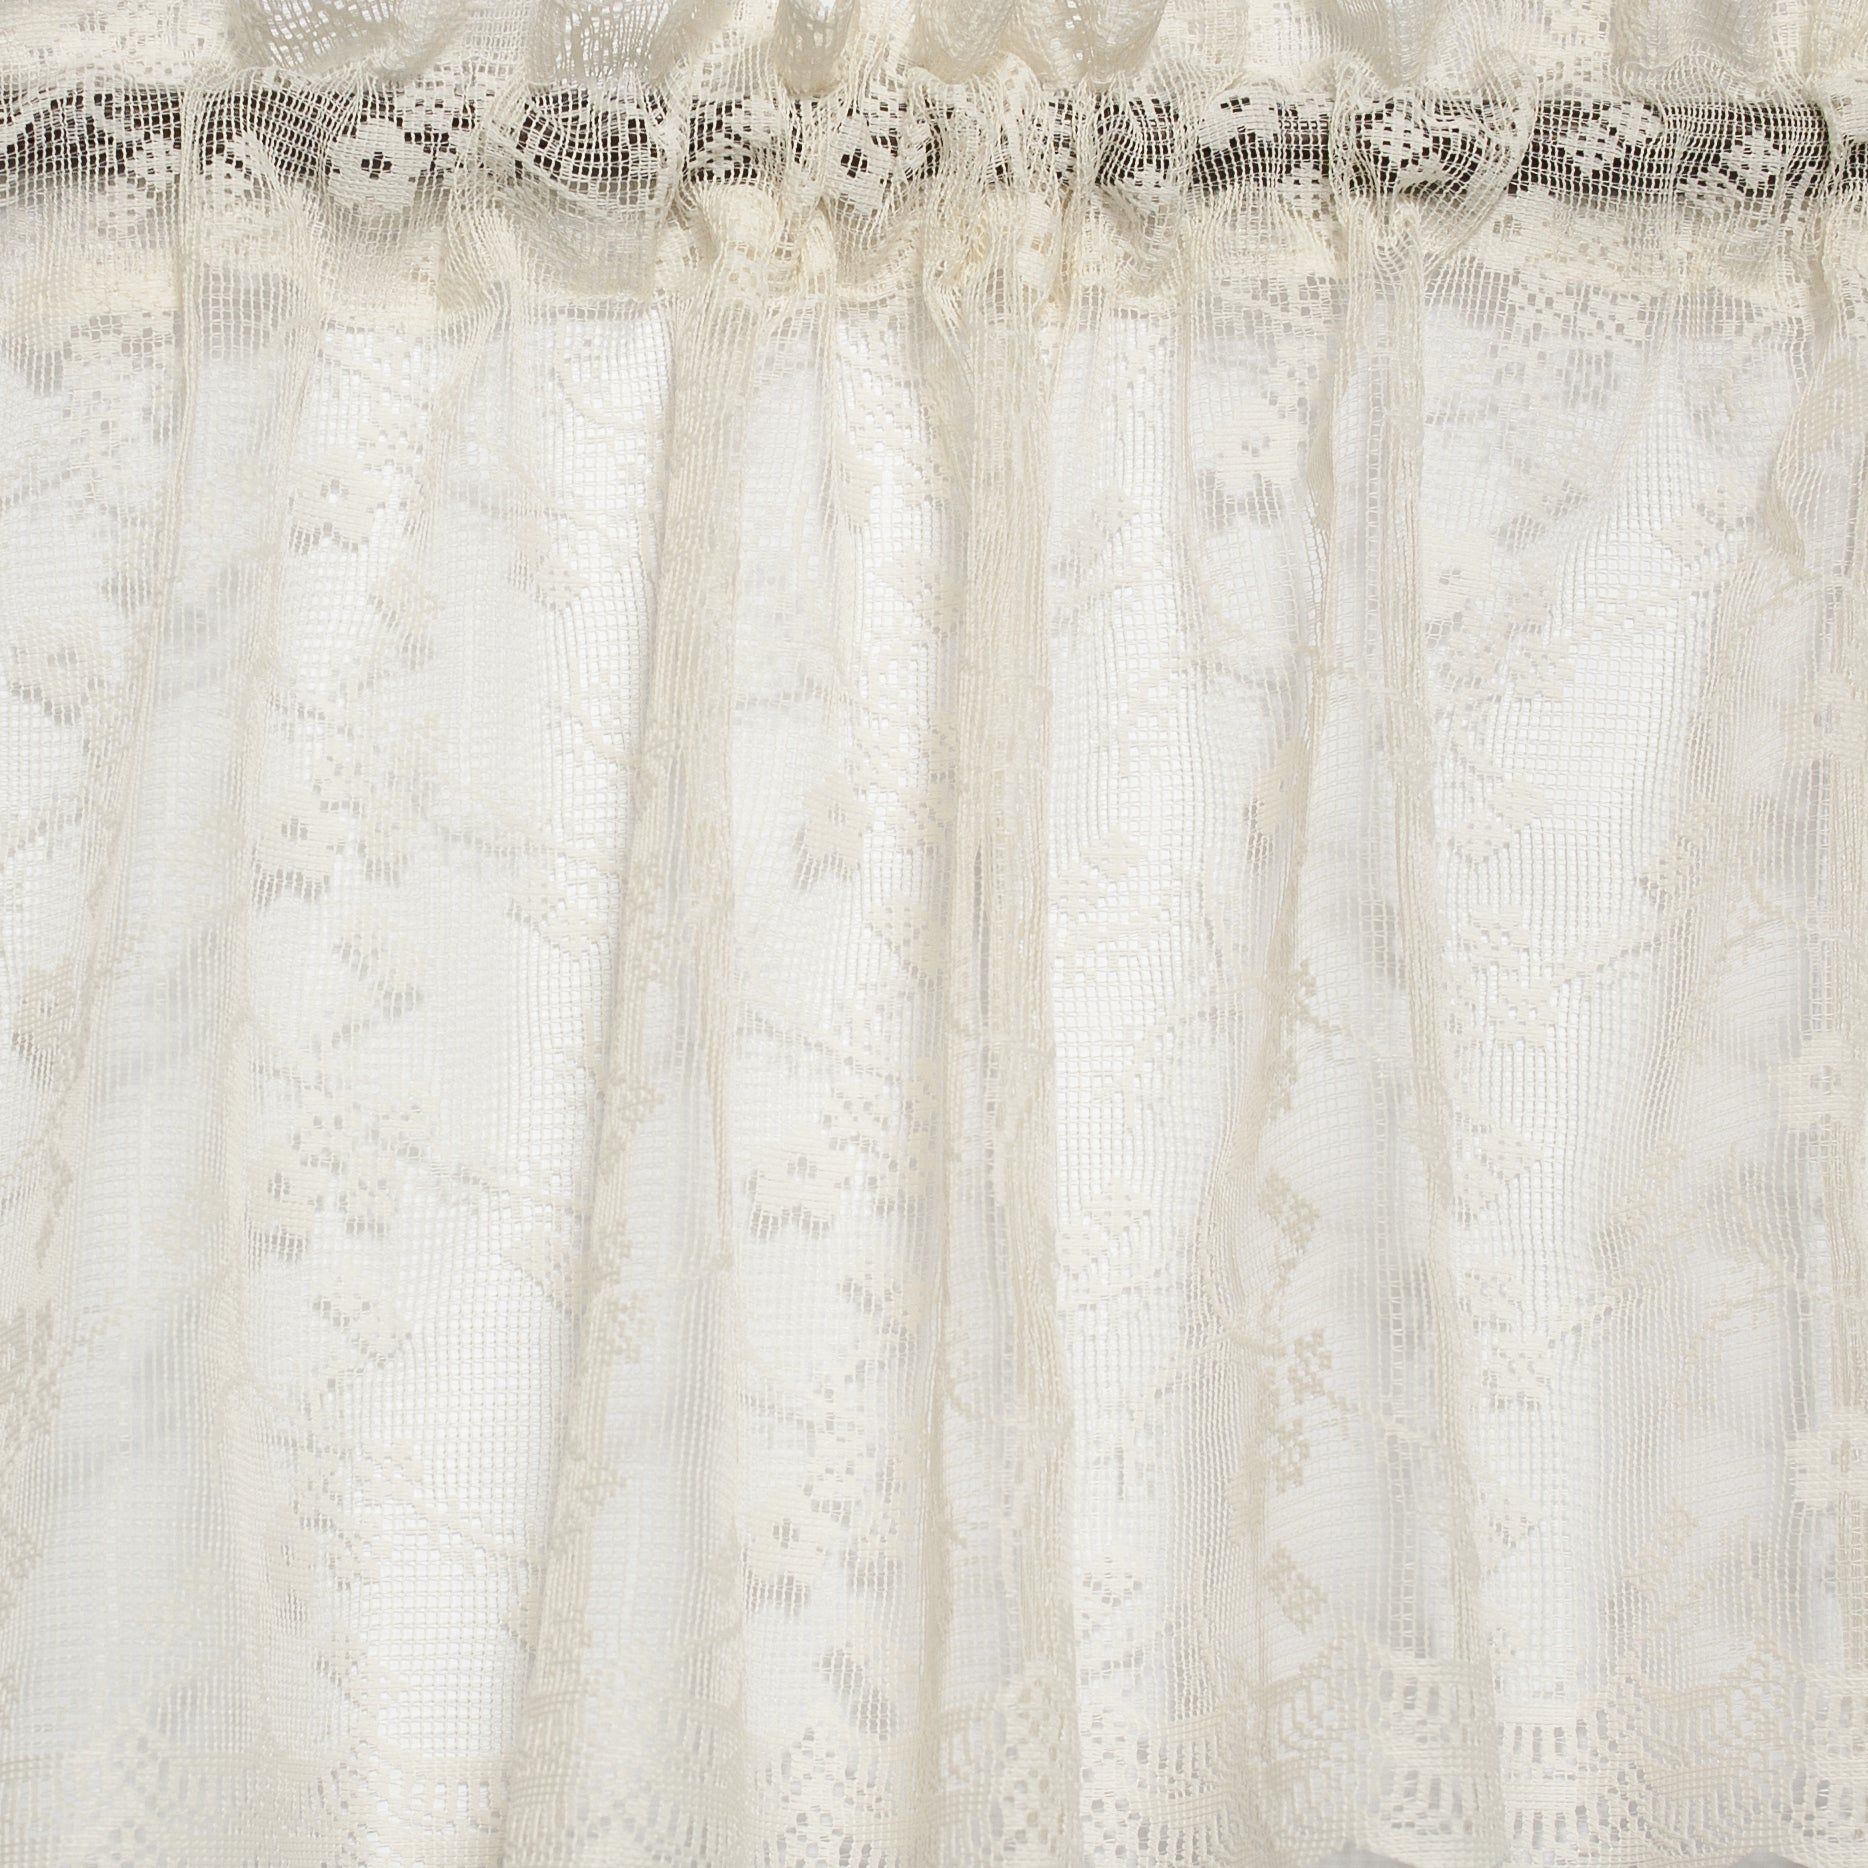 Elegant Ivory Priscilla Lace Kitchen Curtain Pieces  Tier, Swag And Valance  Options In Elegant White Priscilla Lace Kitchen Curtain Pieces (Photo 3 of 20)